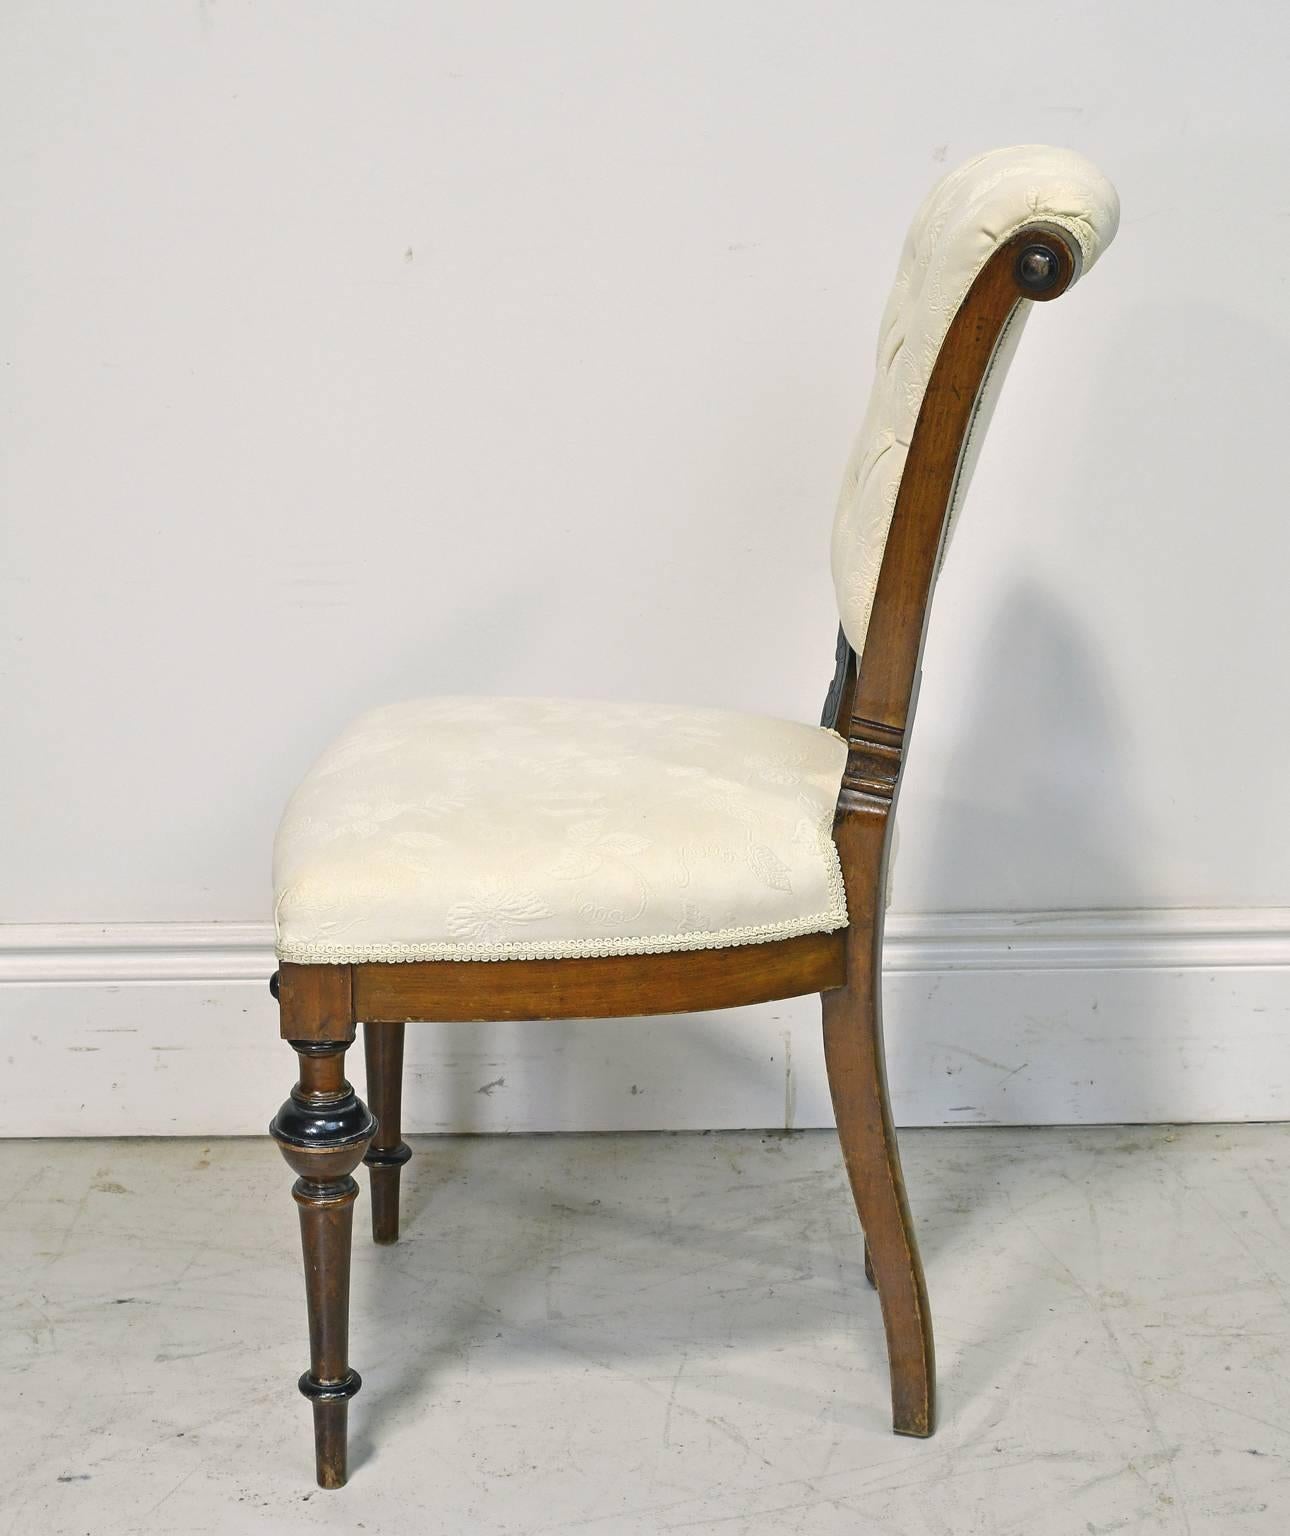 Victorian 19th Century Walnut Side Chair with Ebonized Bandings, Upholstered Seat and Back